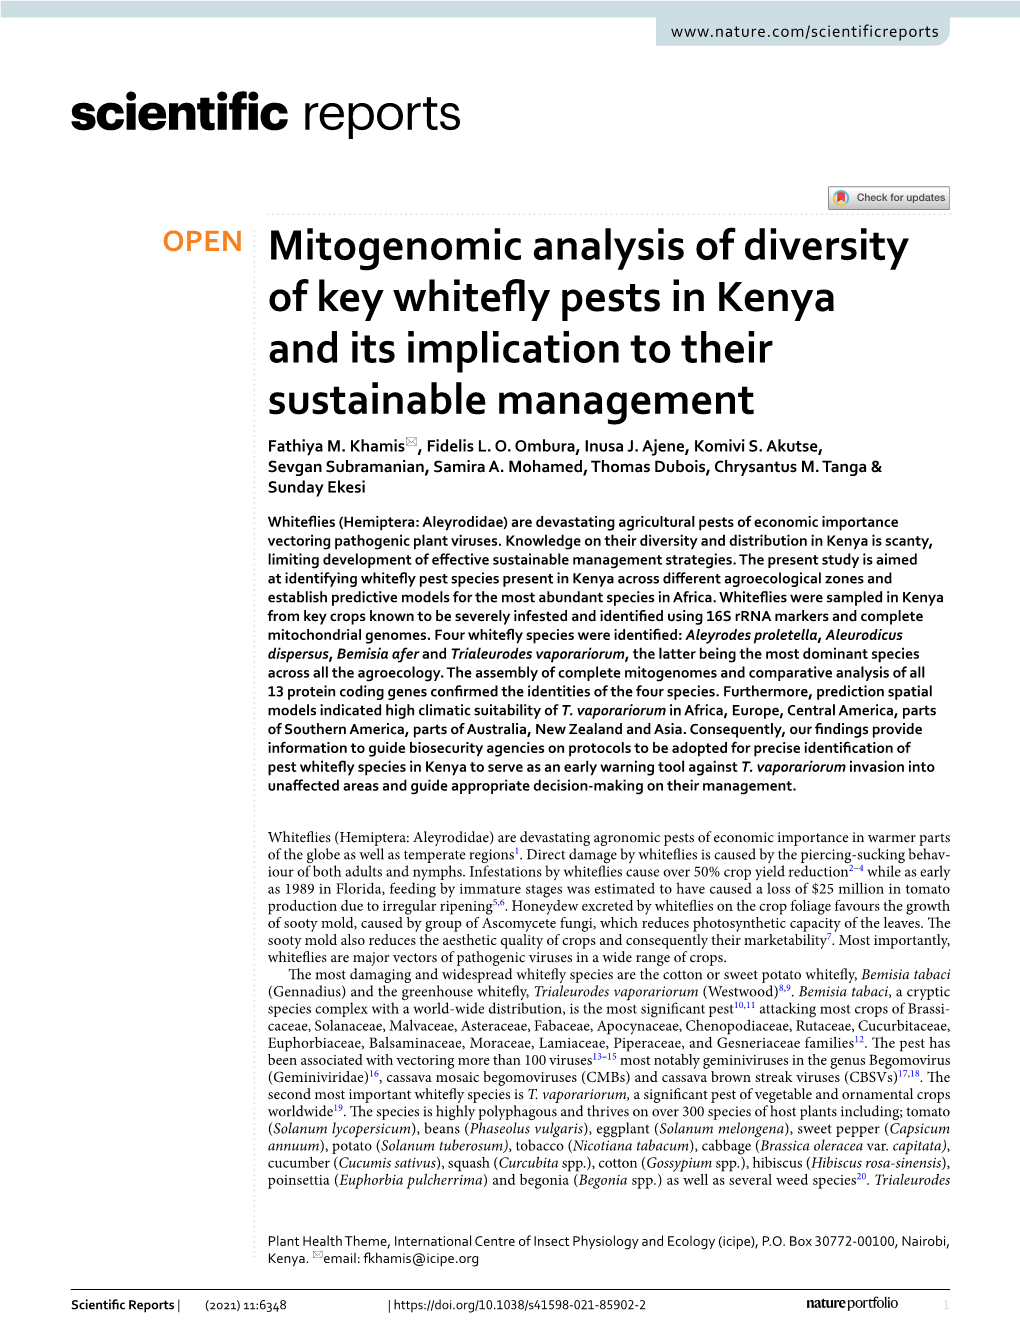 Mitogenomic Analysis of Diversity of Key Whitefly Pests in Kenya and Its